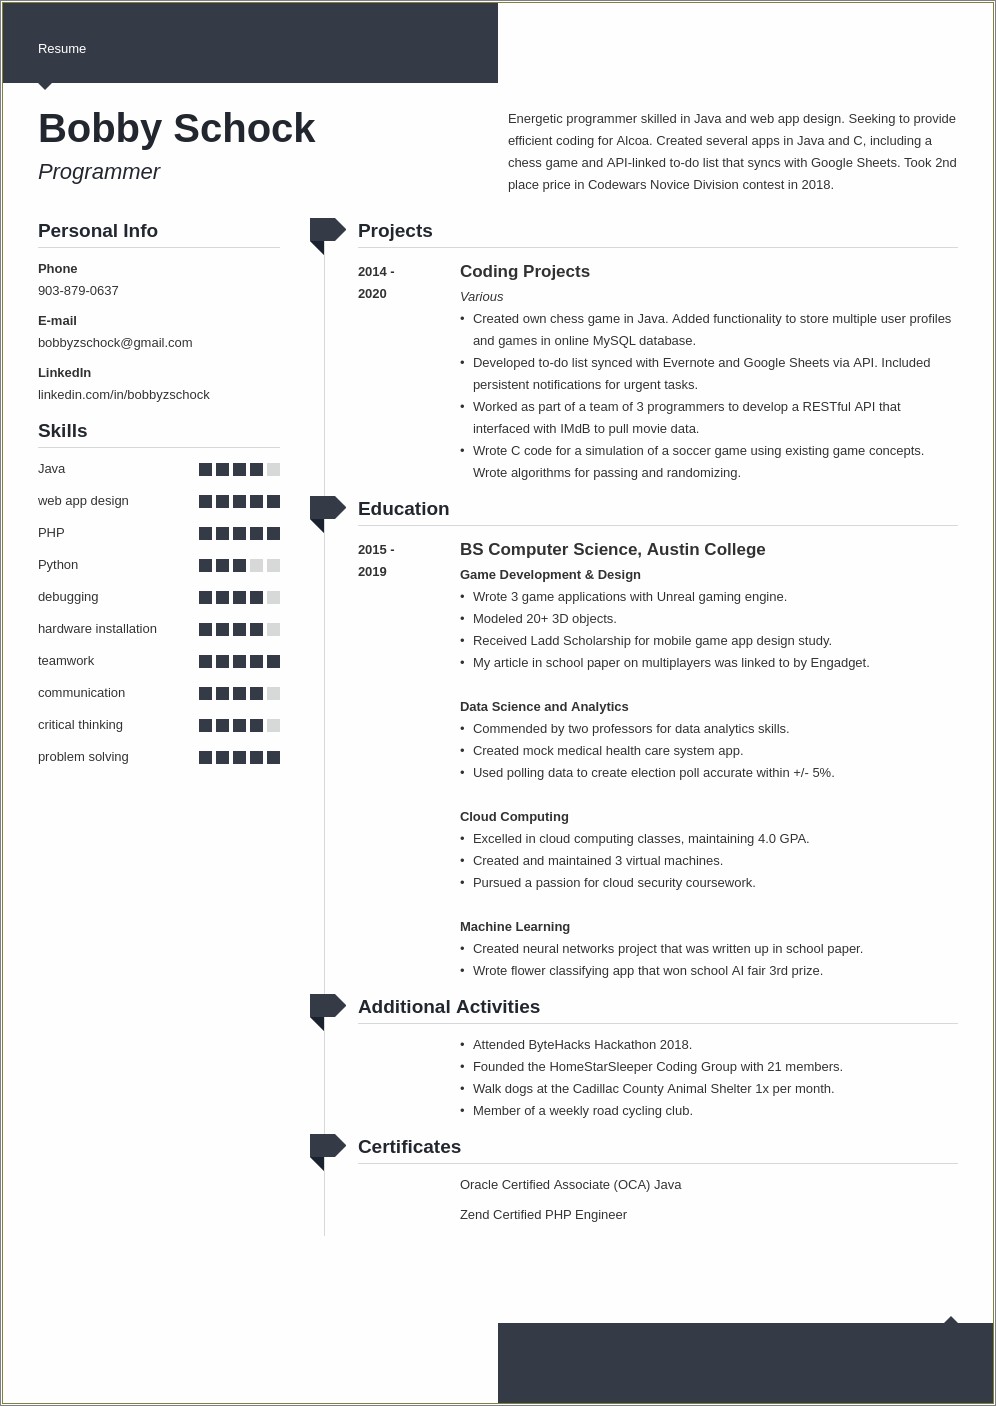 Examples Of Relevant Experience For Resumes